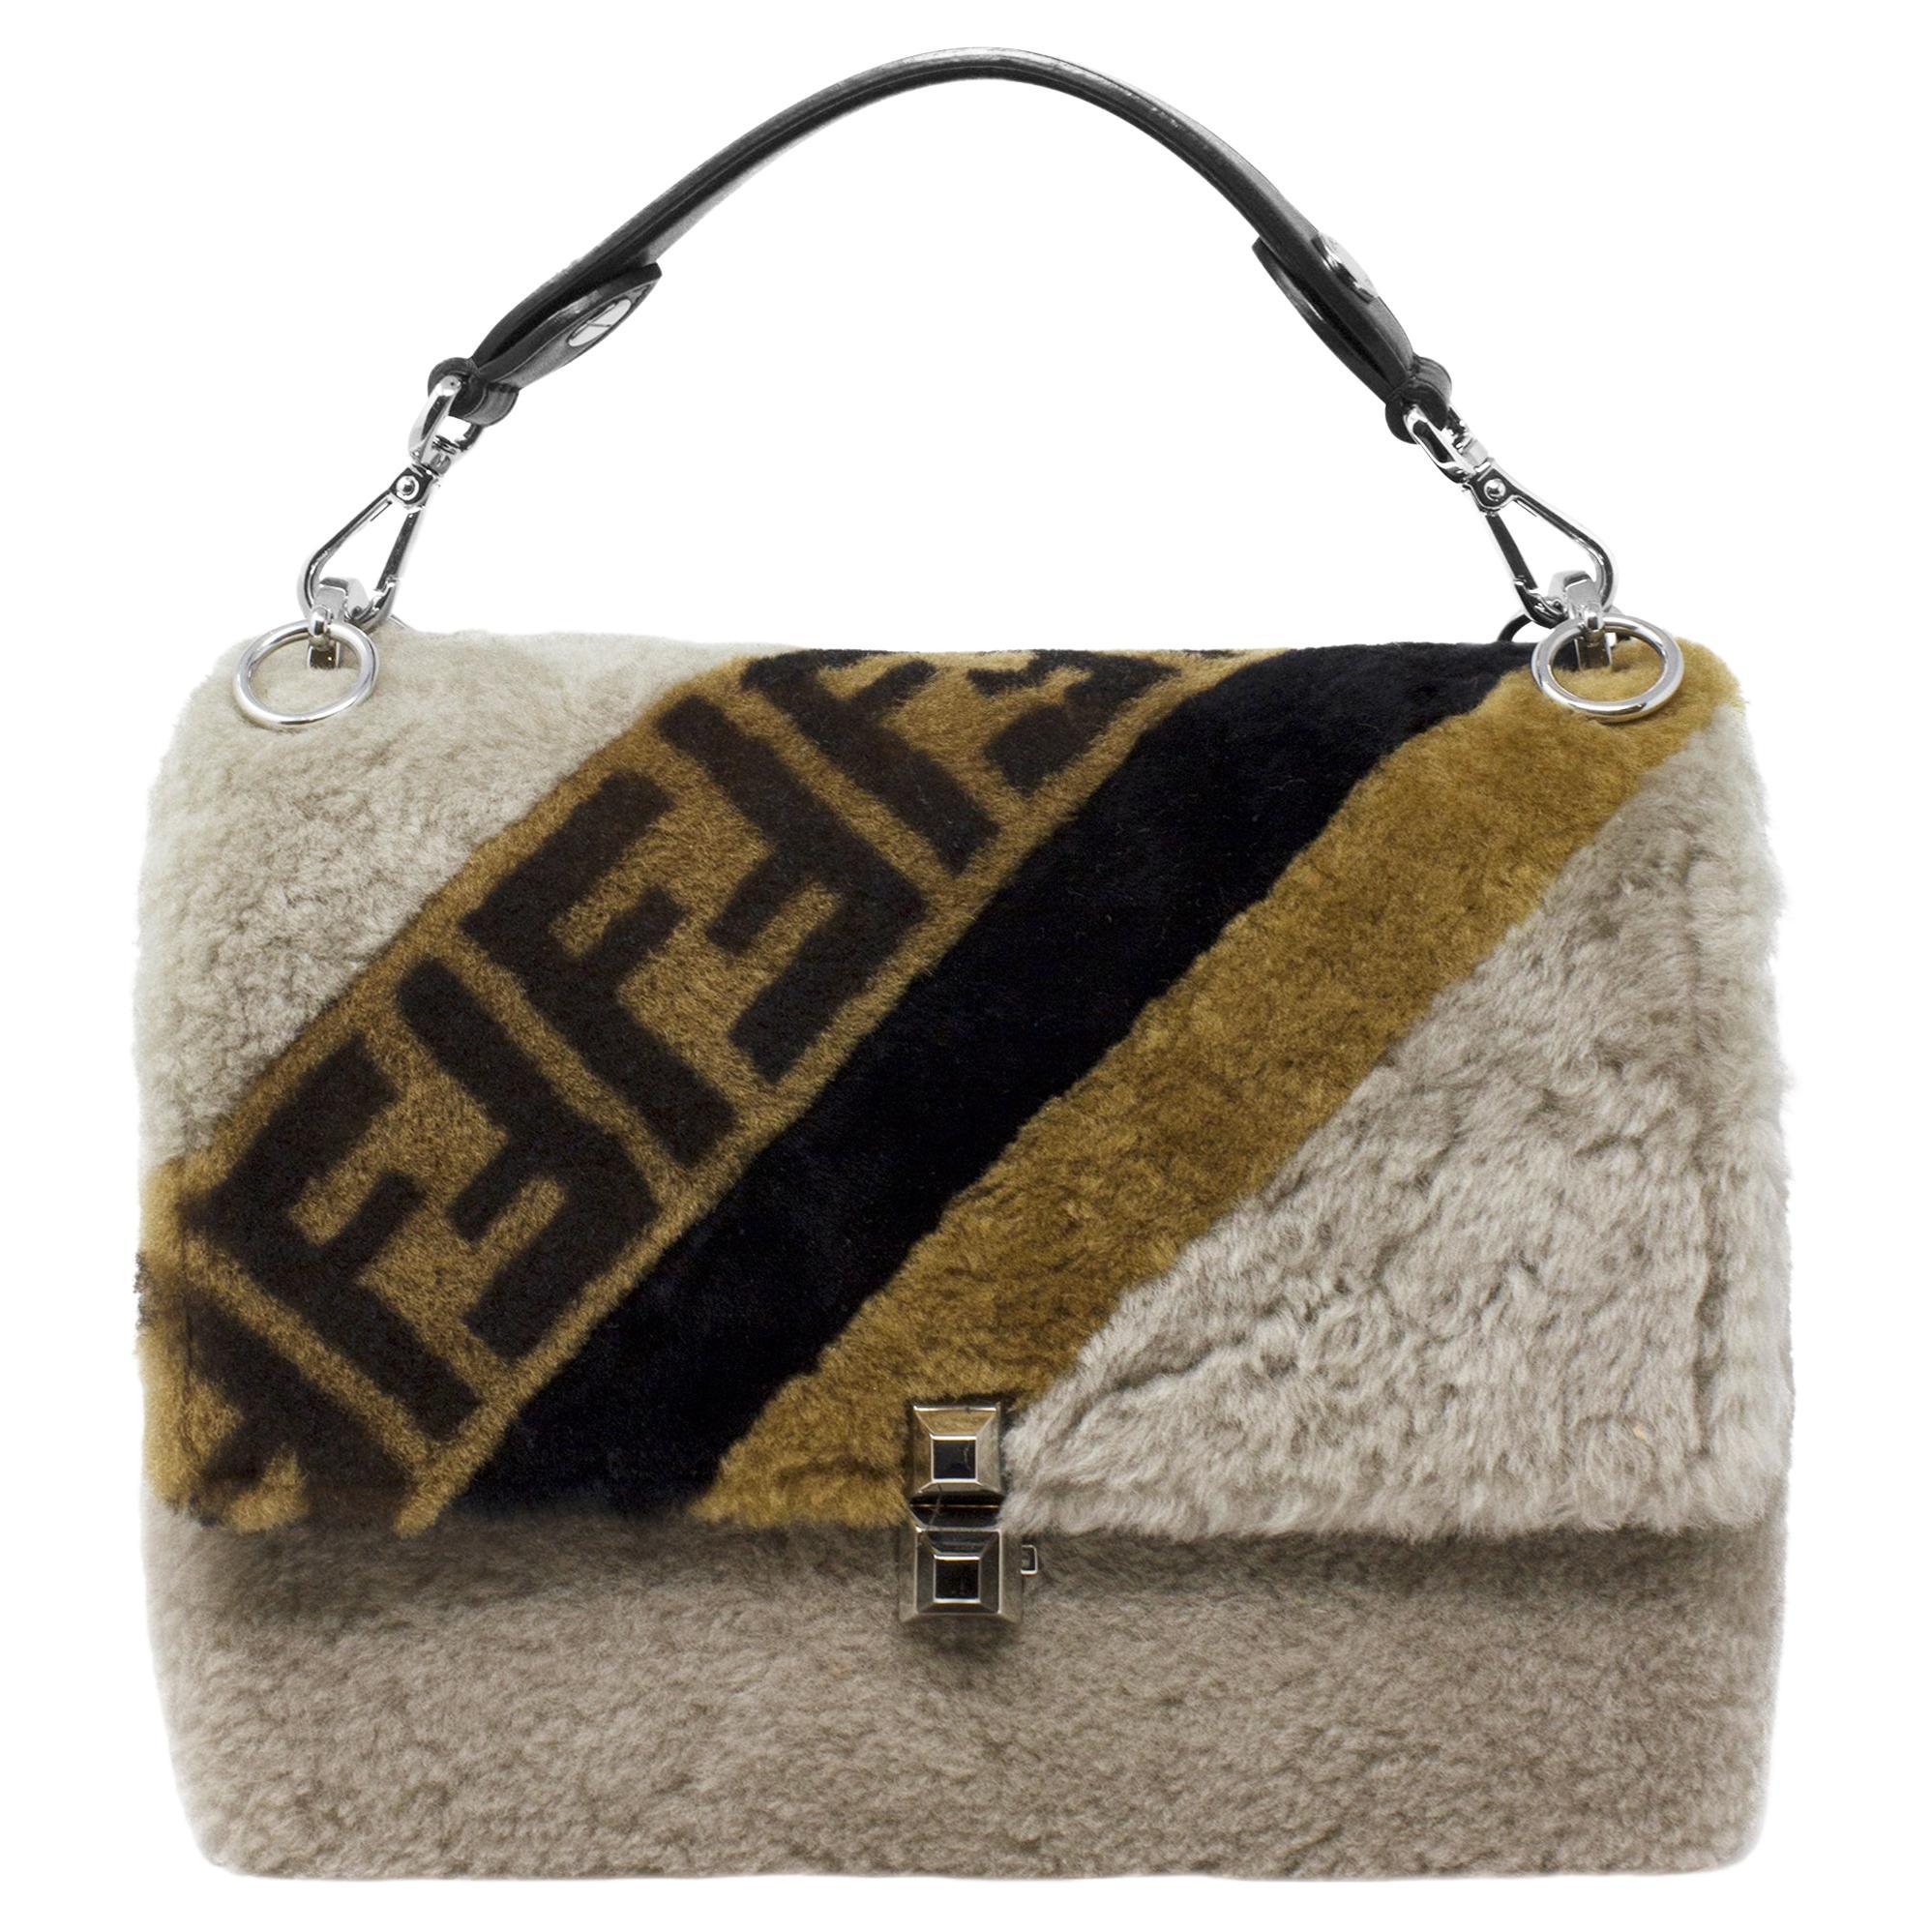 Fendi Limited Edition Shearling Zucca Flap Bag For Sale